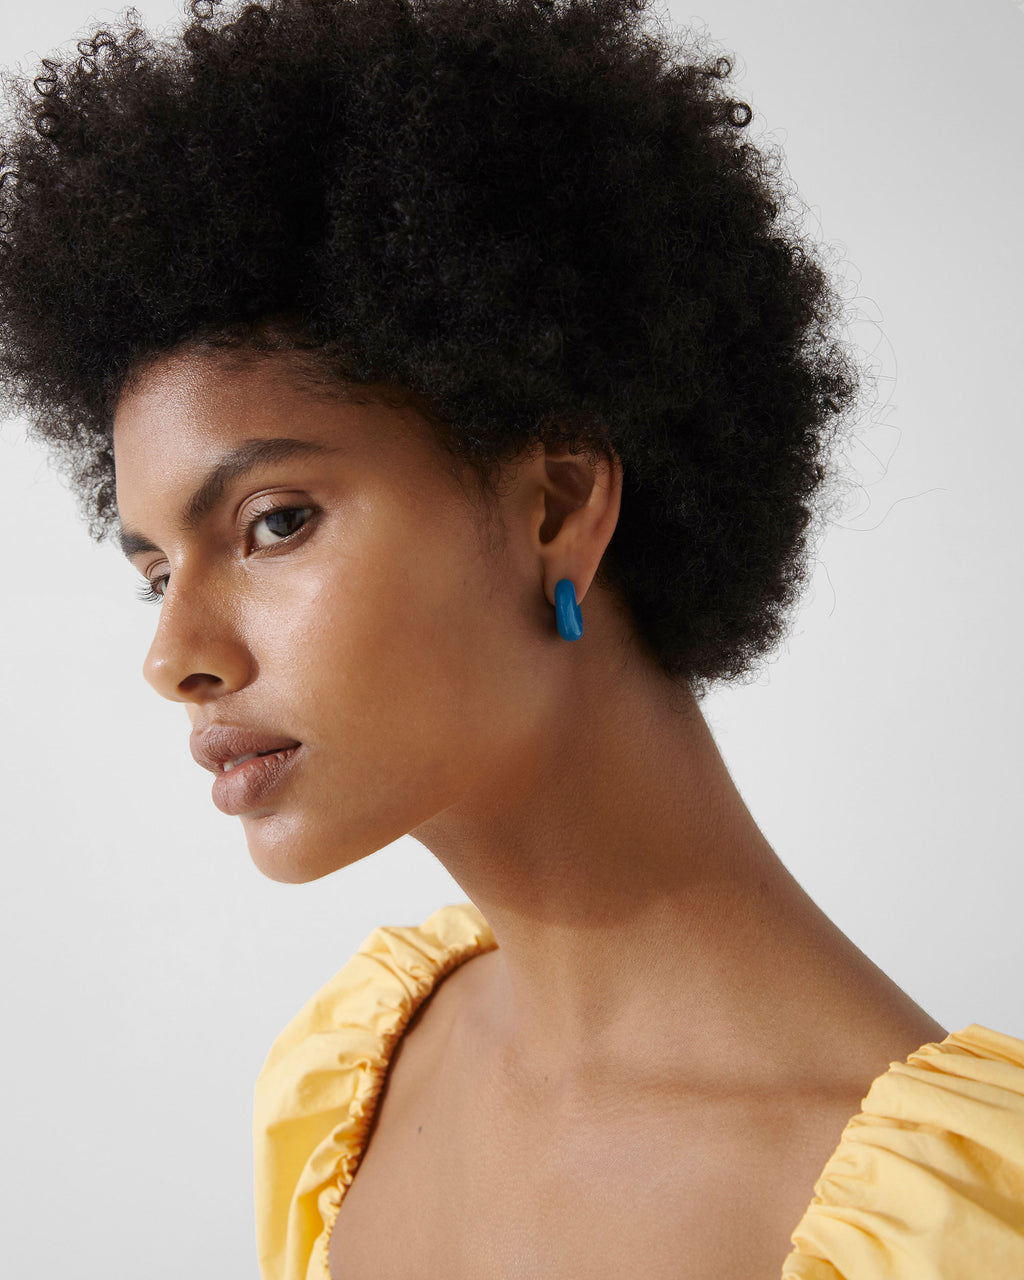 Volume Hoops Gold Plated with Blue Enamel